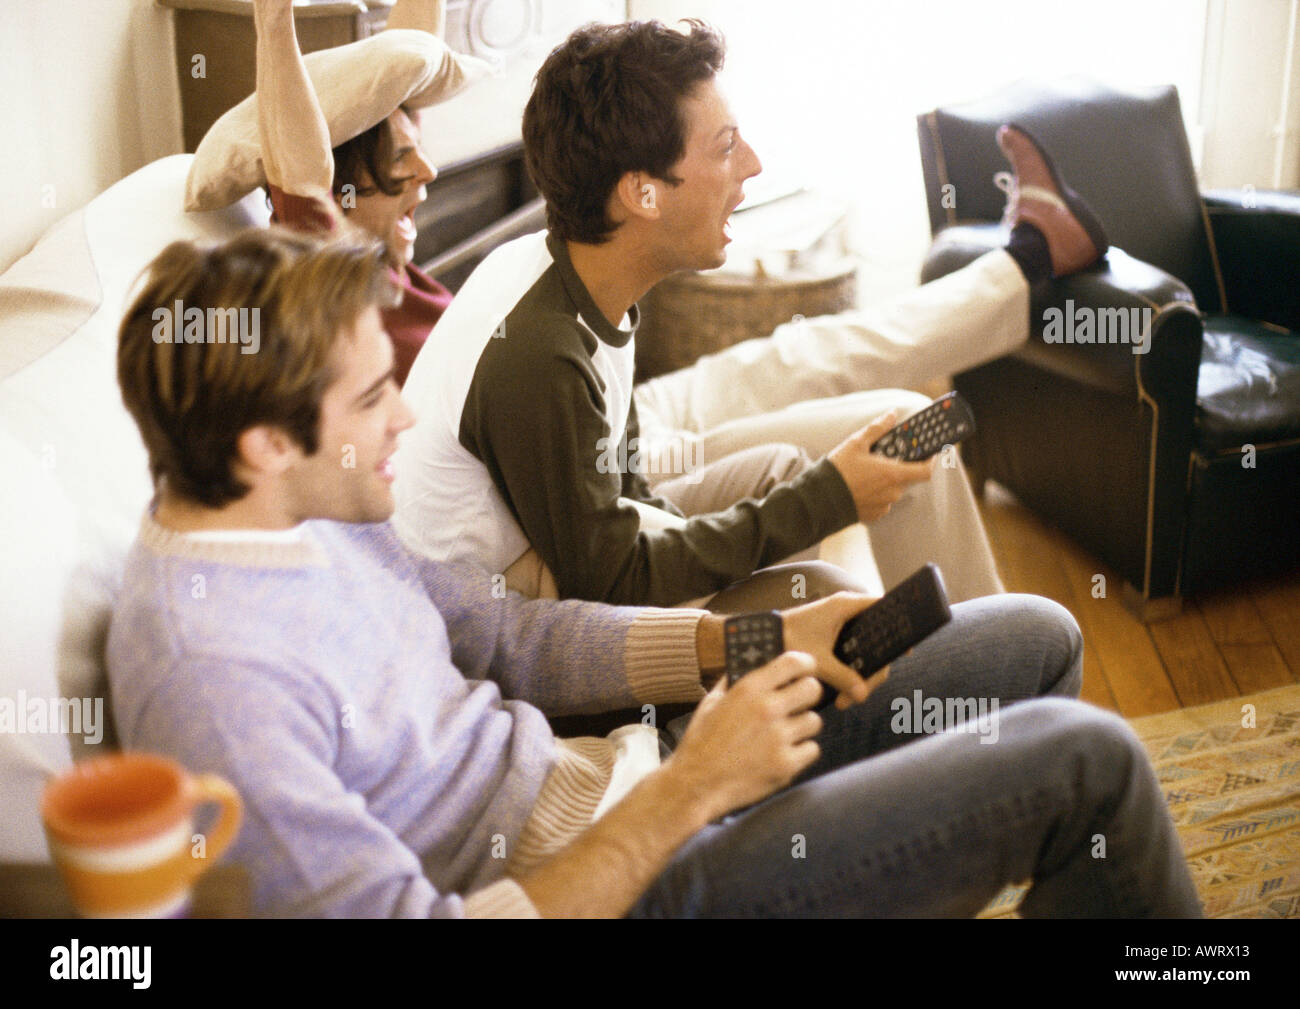 Three men sitting on sofa with remote controls, side view Stock Photo